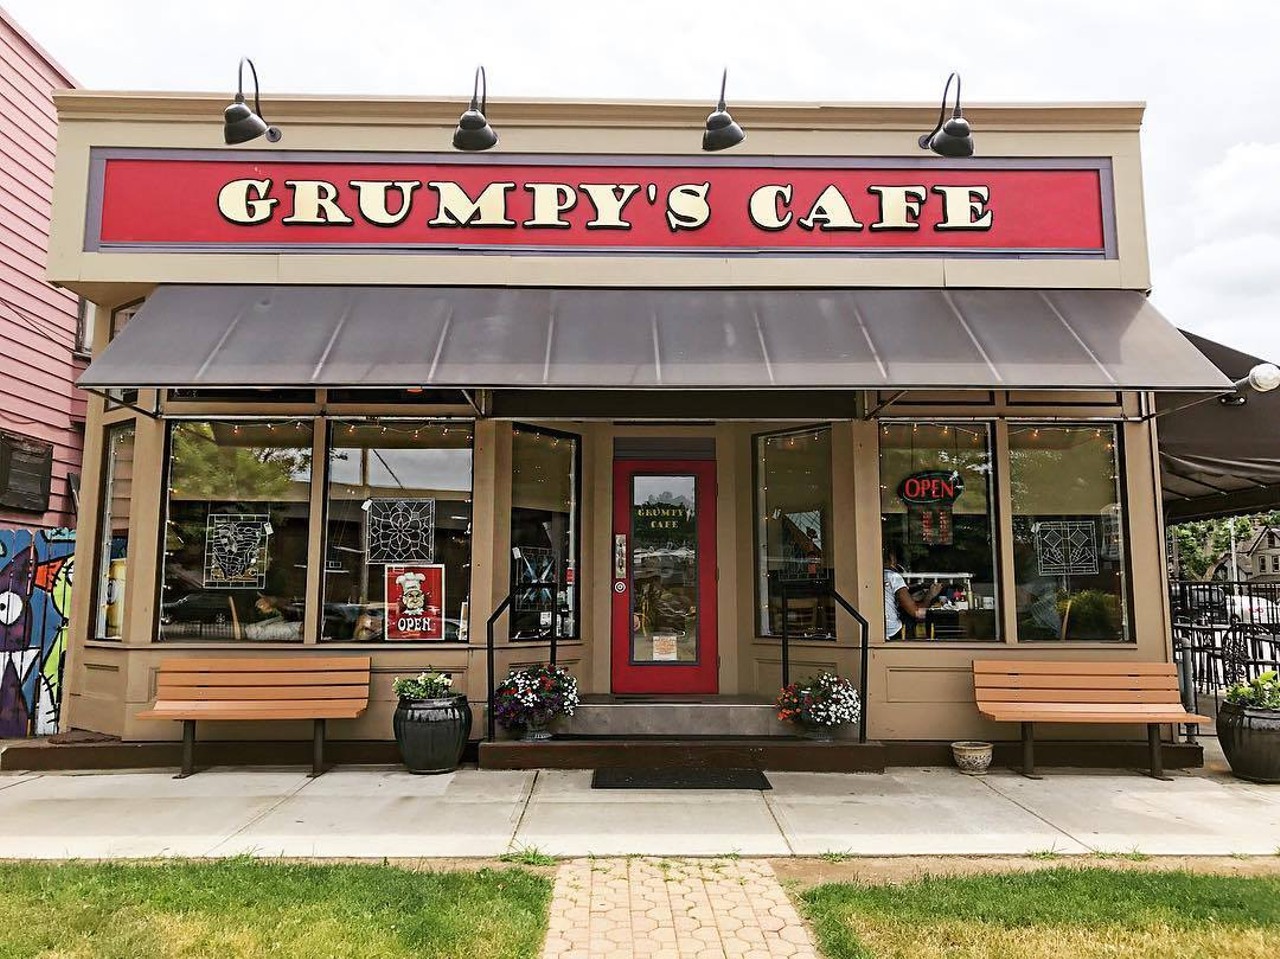  Grumpy&#146;s Cafe
Where: 2621 W. 14th St.
When: Fridays 11:30 a.m.-10 p.m. and Saturdays 4 p.m.-10 p.m. in October
Menu: One dozen fresh steamed middleneck clams, mesquite baked half chicken, mashed sweet potatoes, southwest corn, soup or side salad & homemade bread for $26. $10 for one dozen extra clams.
Photo via Grumpy's Cafe/Facebook